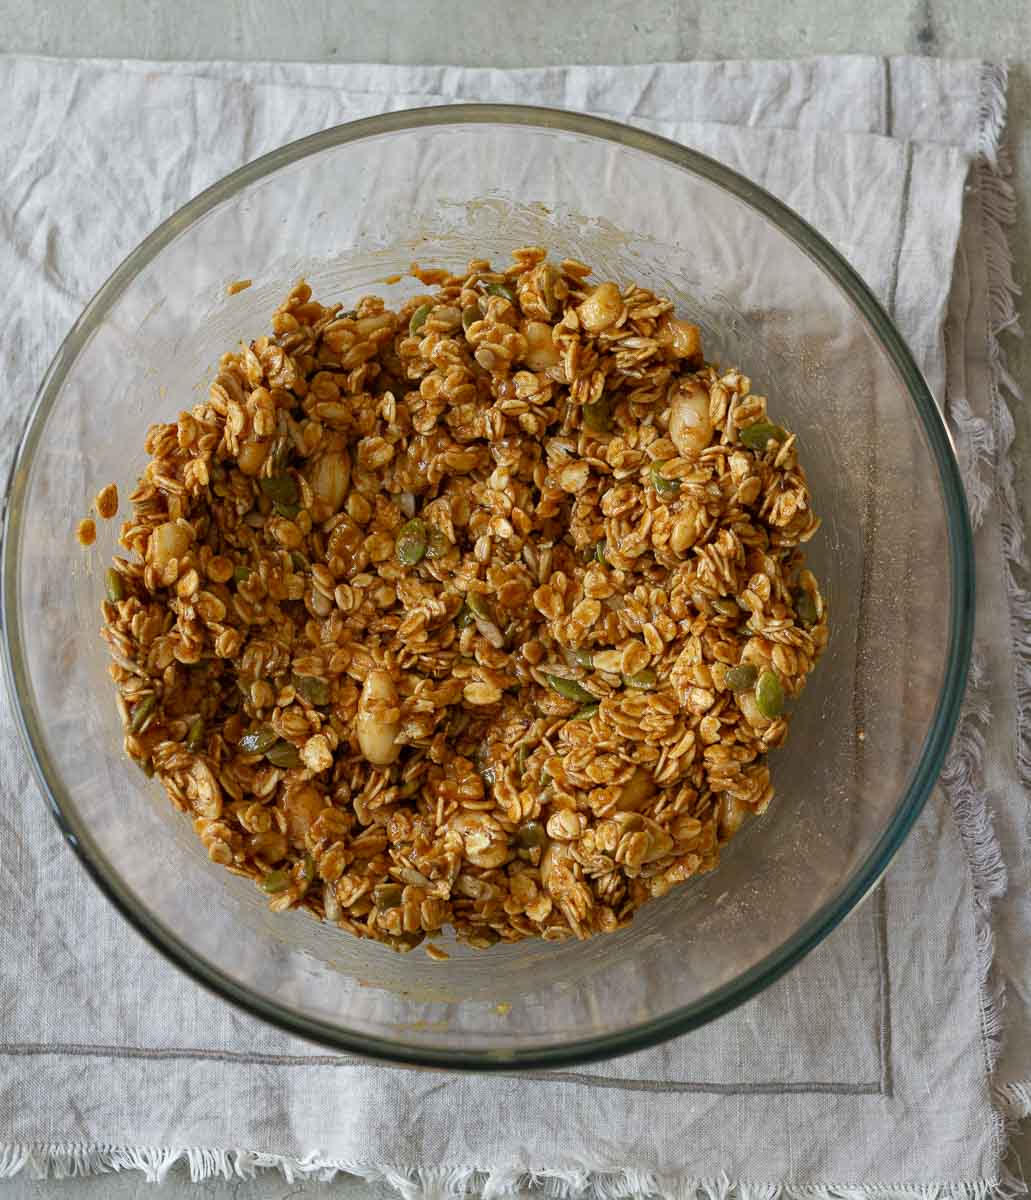 Granola mixture in a bowl